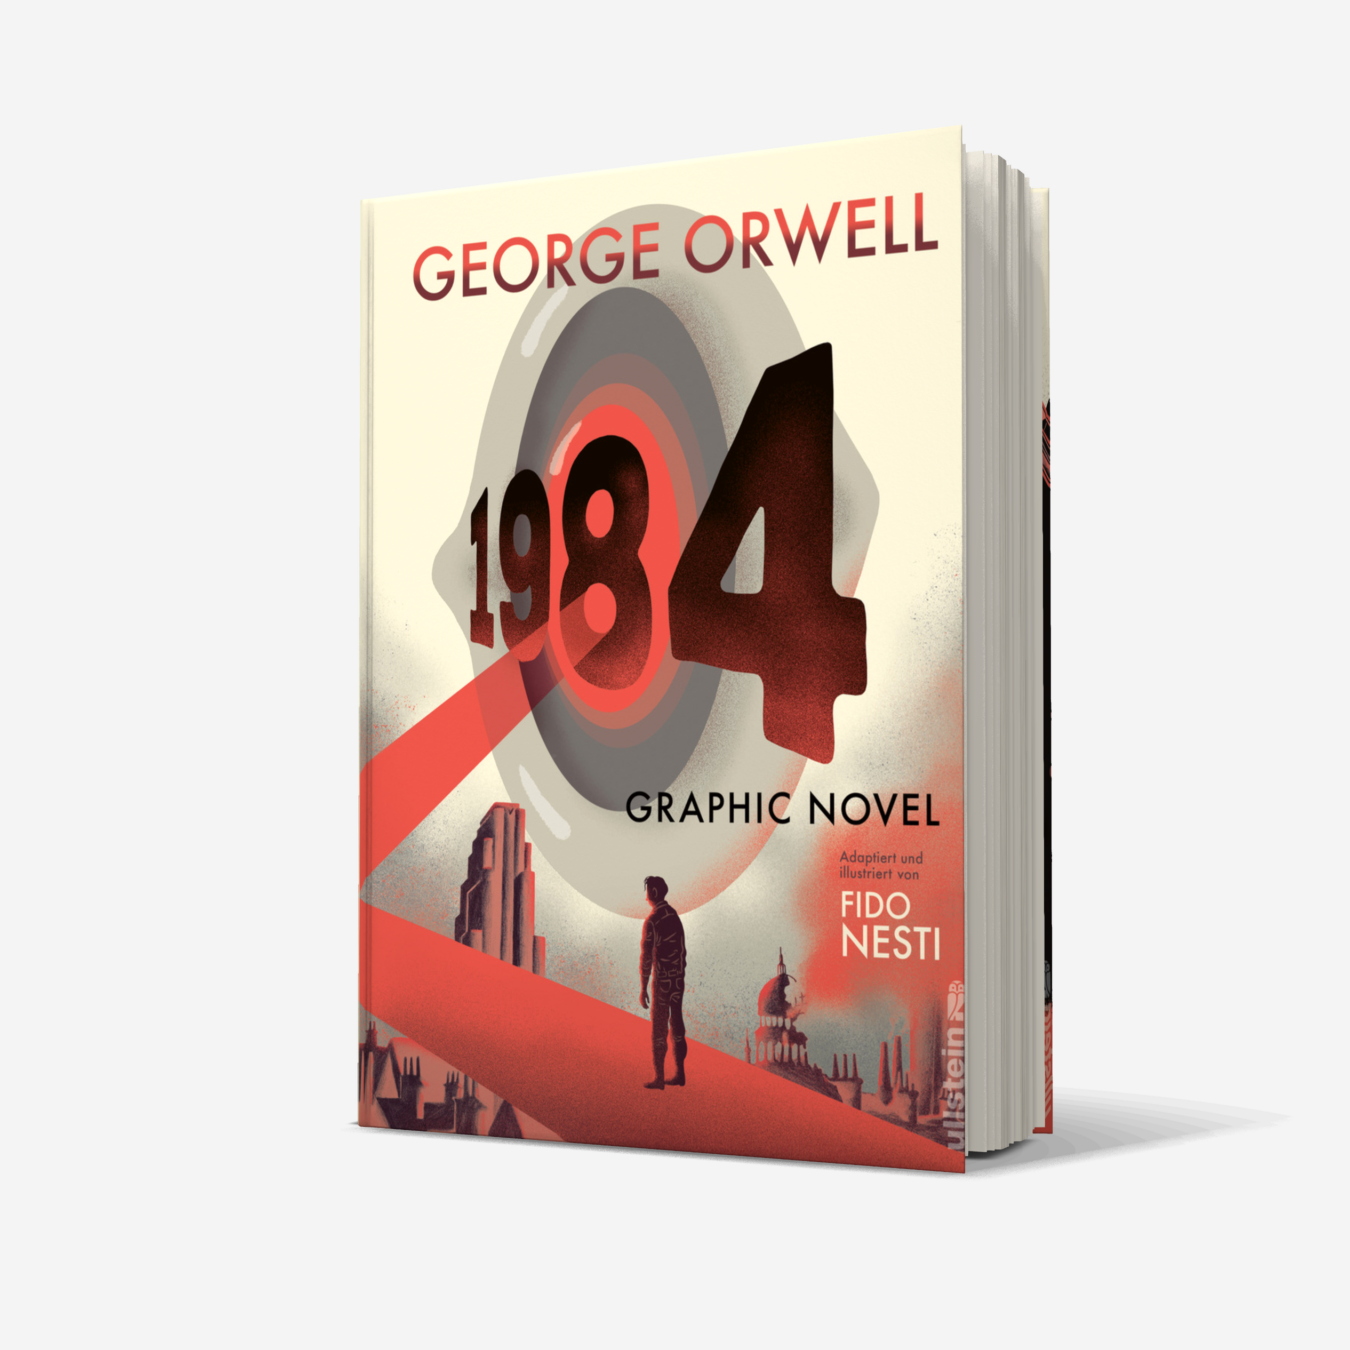 George Orwell's 1984The Graphic Novel